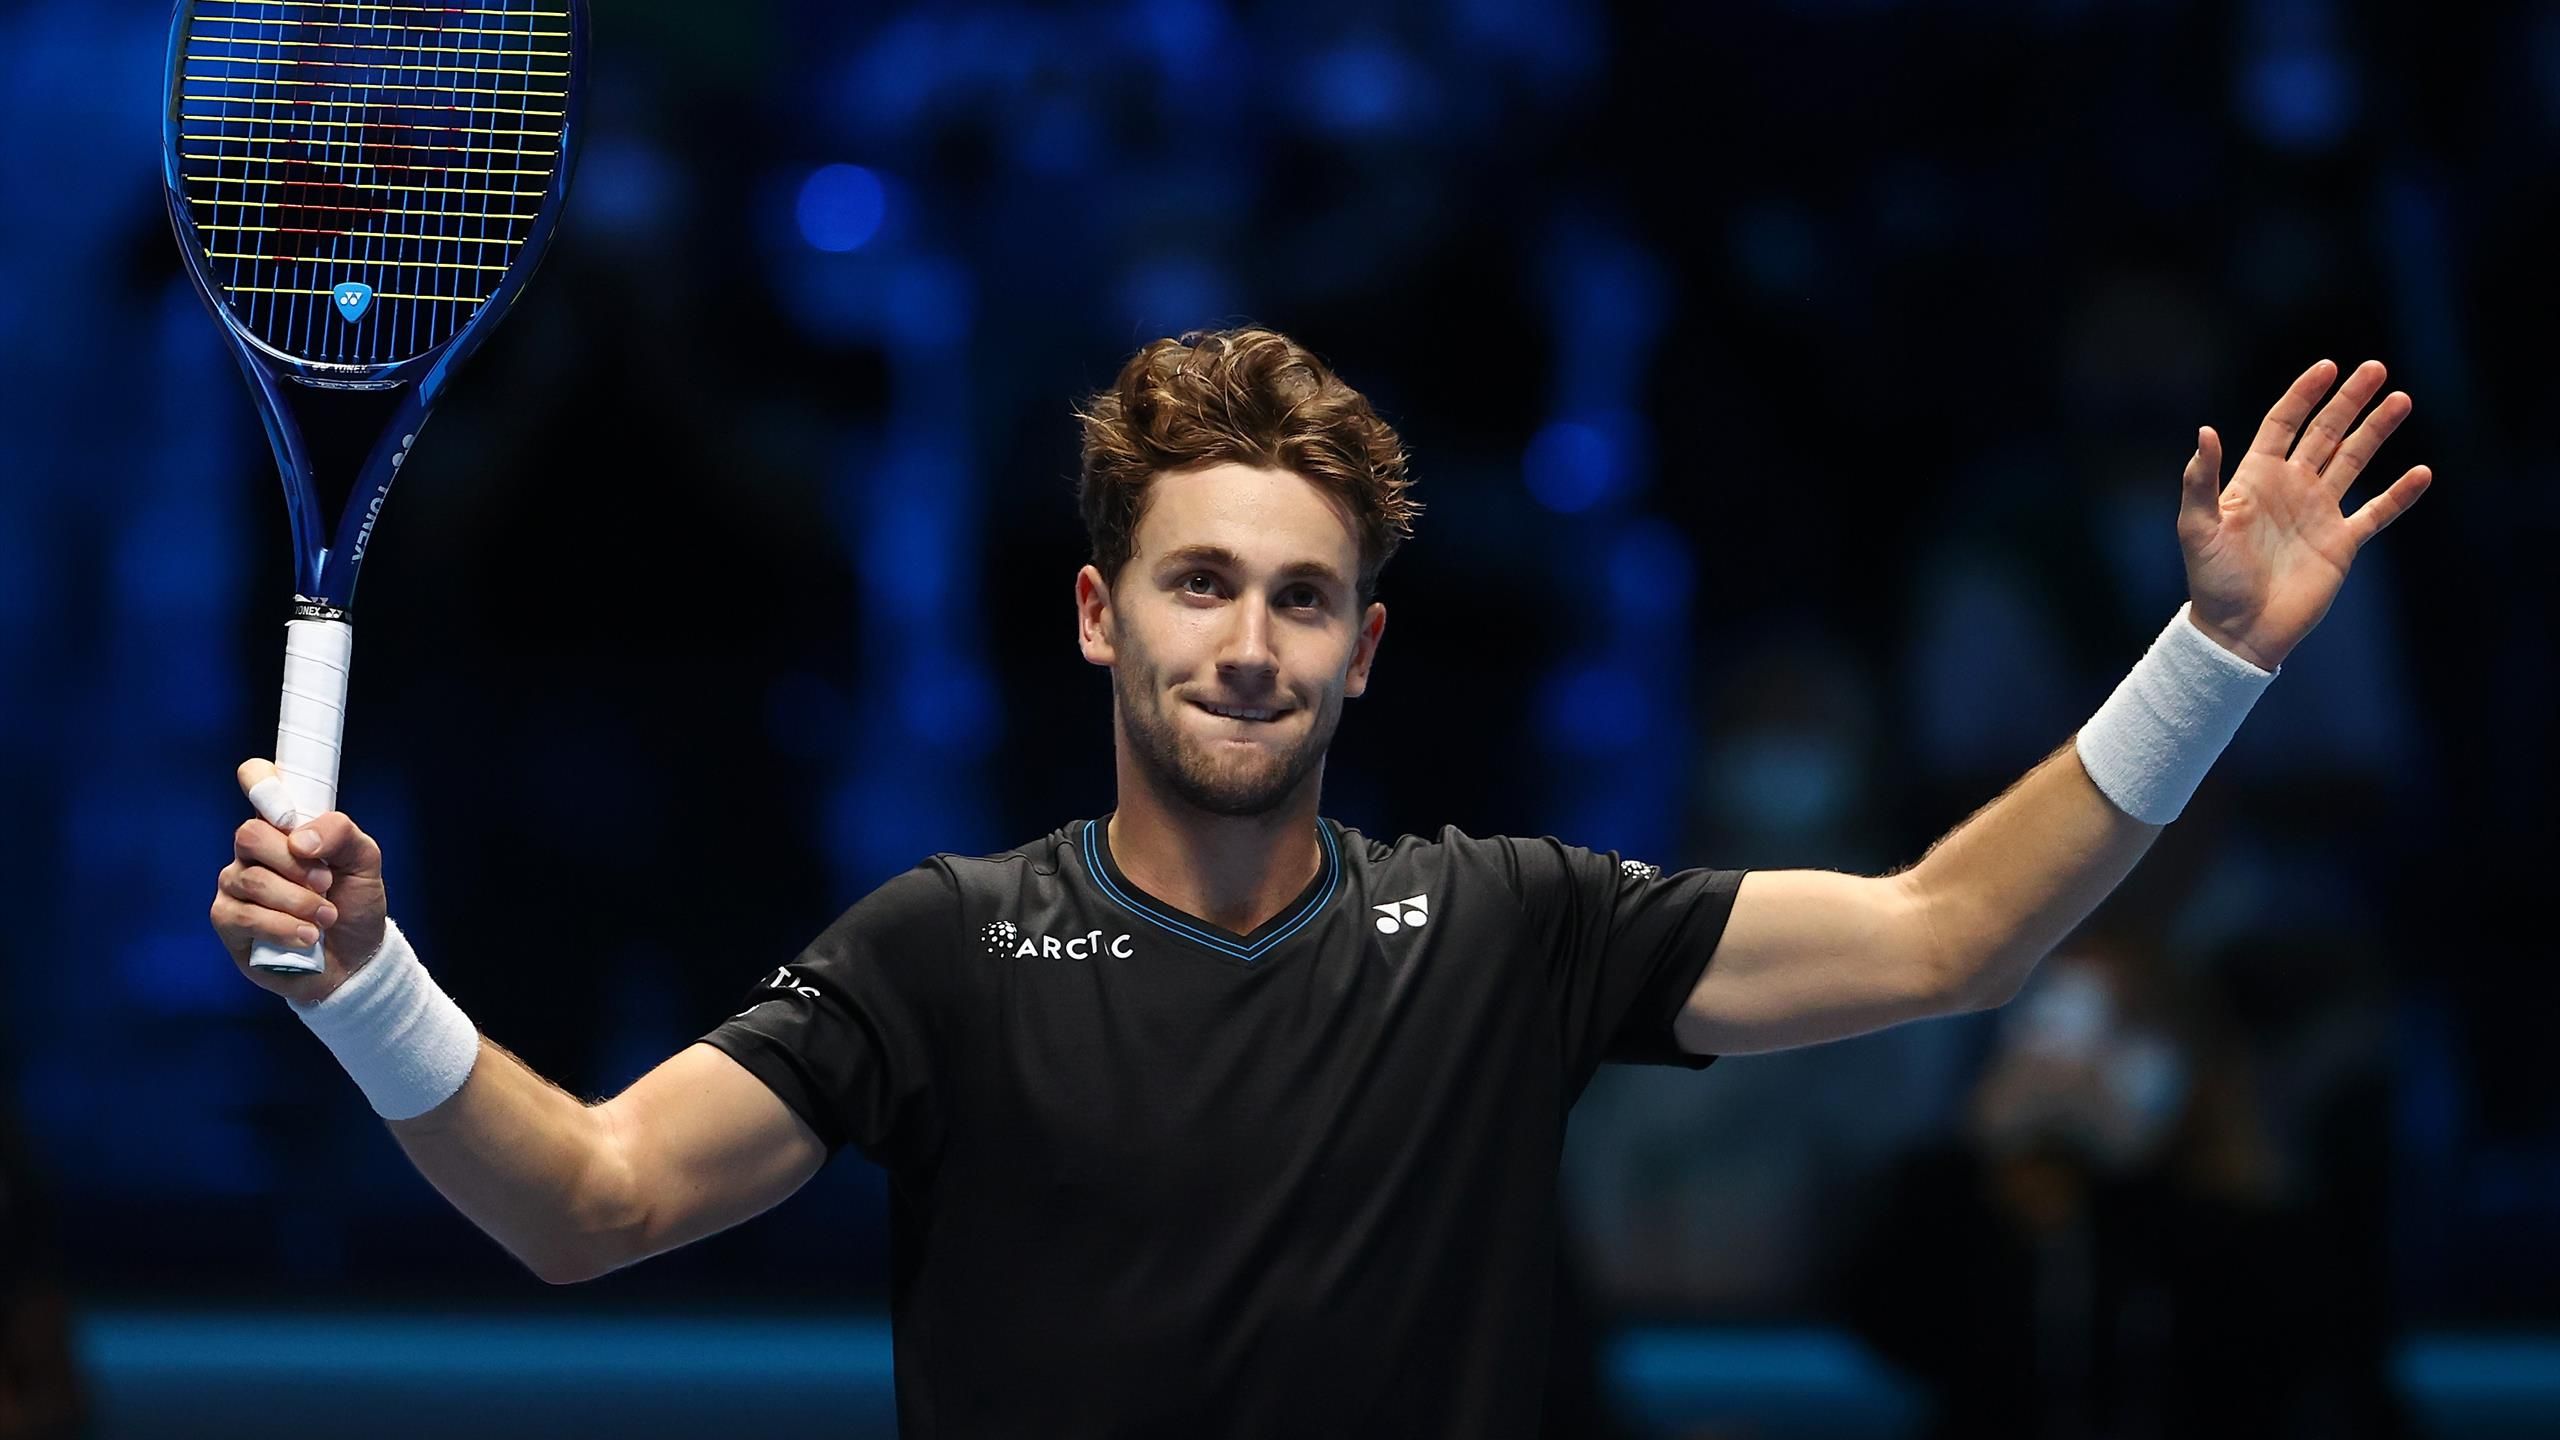 Casper Ruud battles back to beat ATP finals debutant Cameron Norrie in three sets and take first win